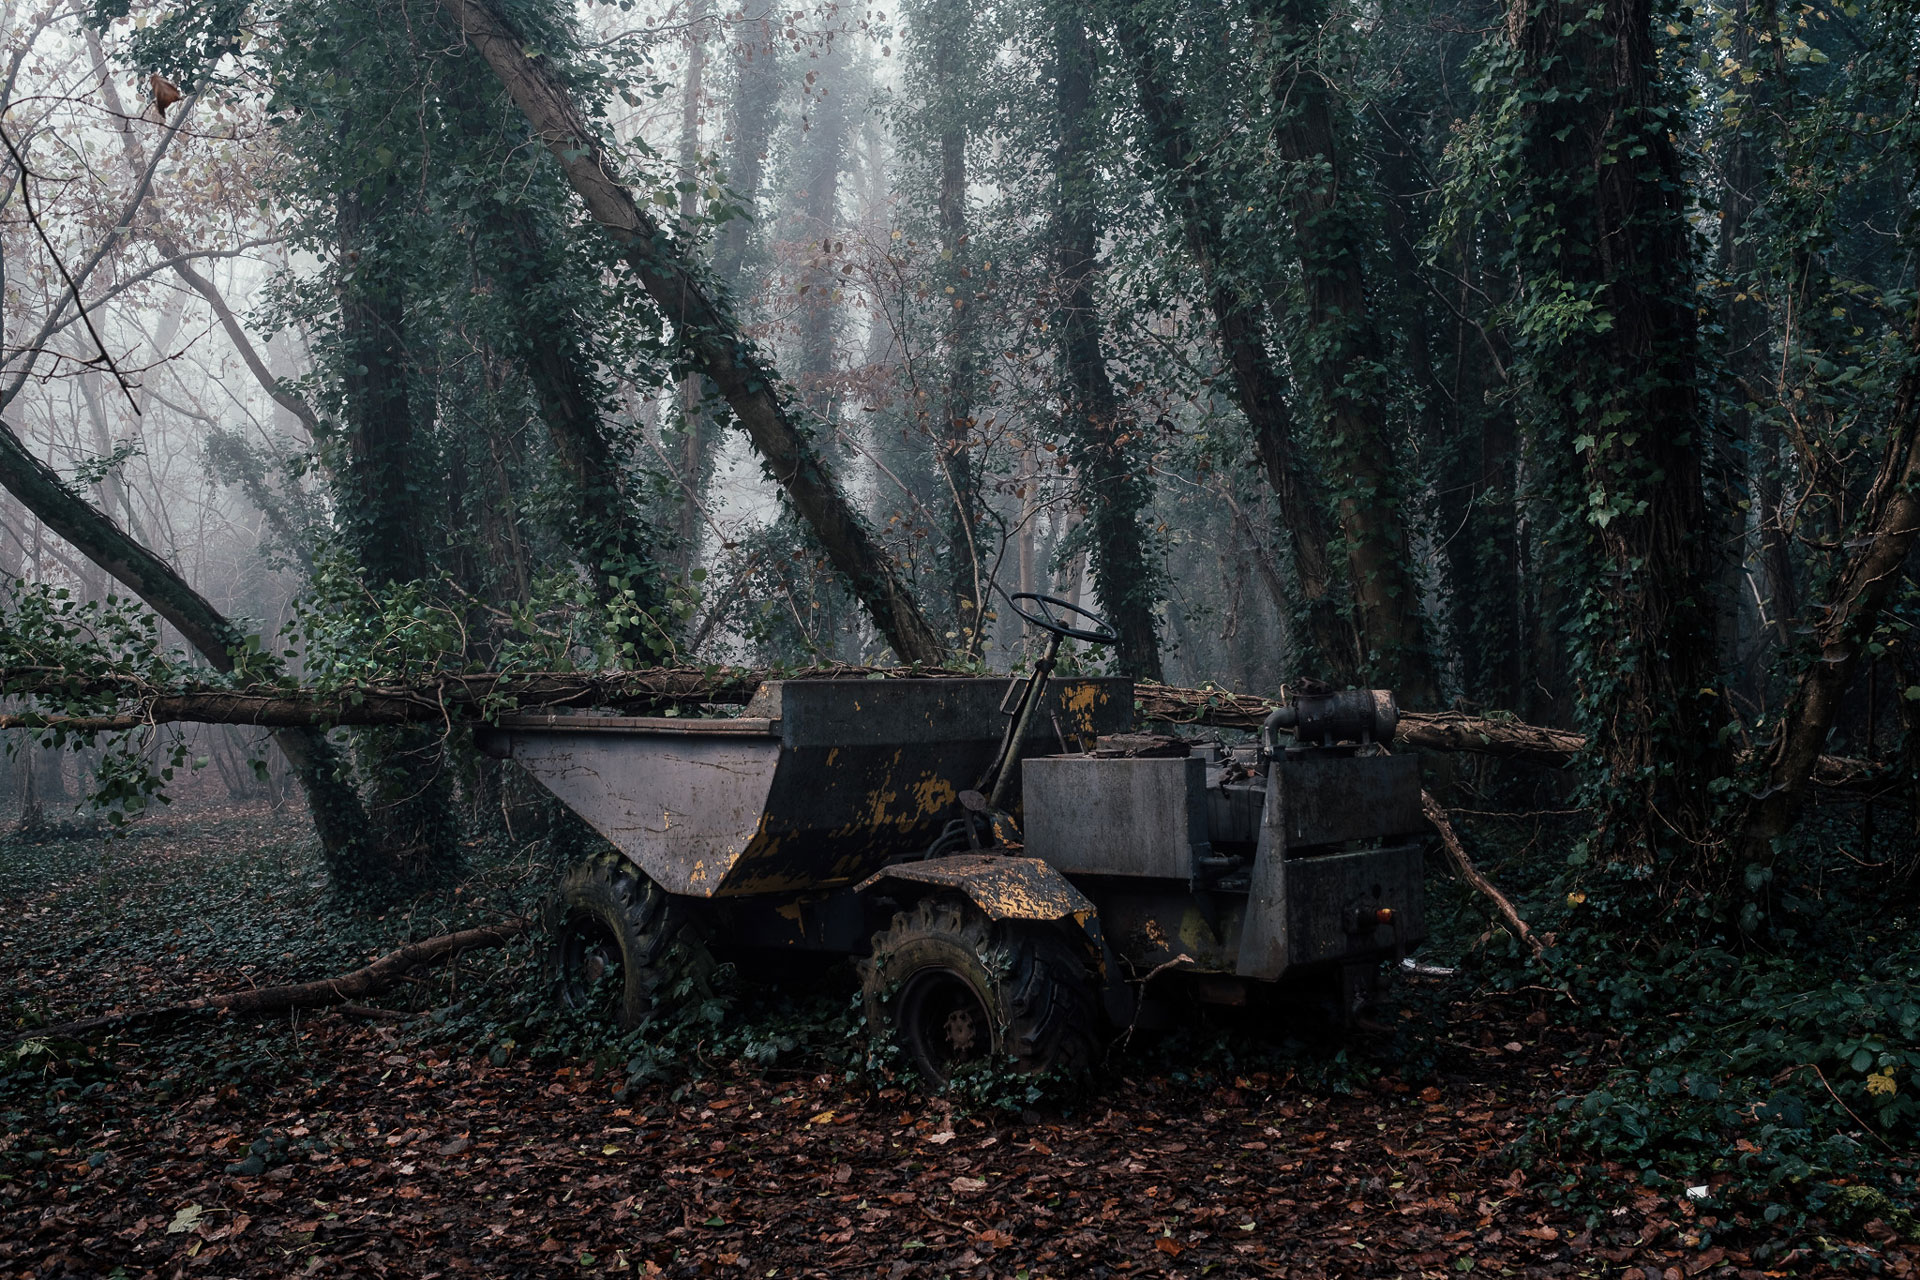 Along The Way Photographic Documentary Abandoned dumper truck on Walton Common